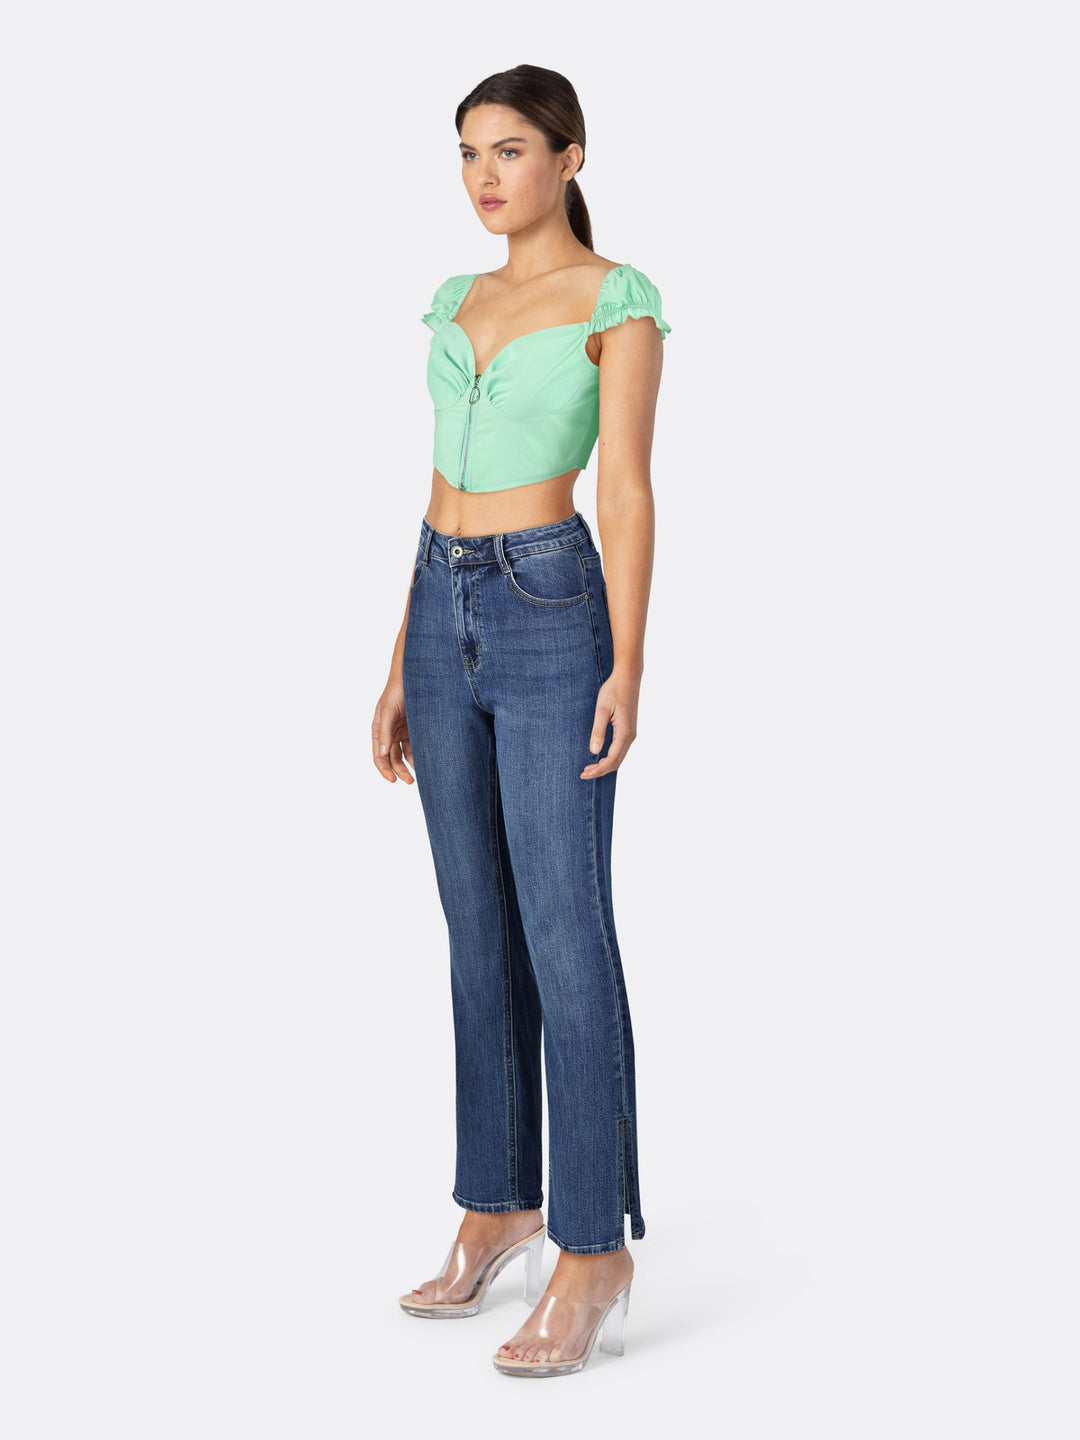 Low-cut Front Zipper Puff Sleeve Crop Top with V-neck Mint Side